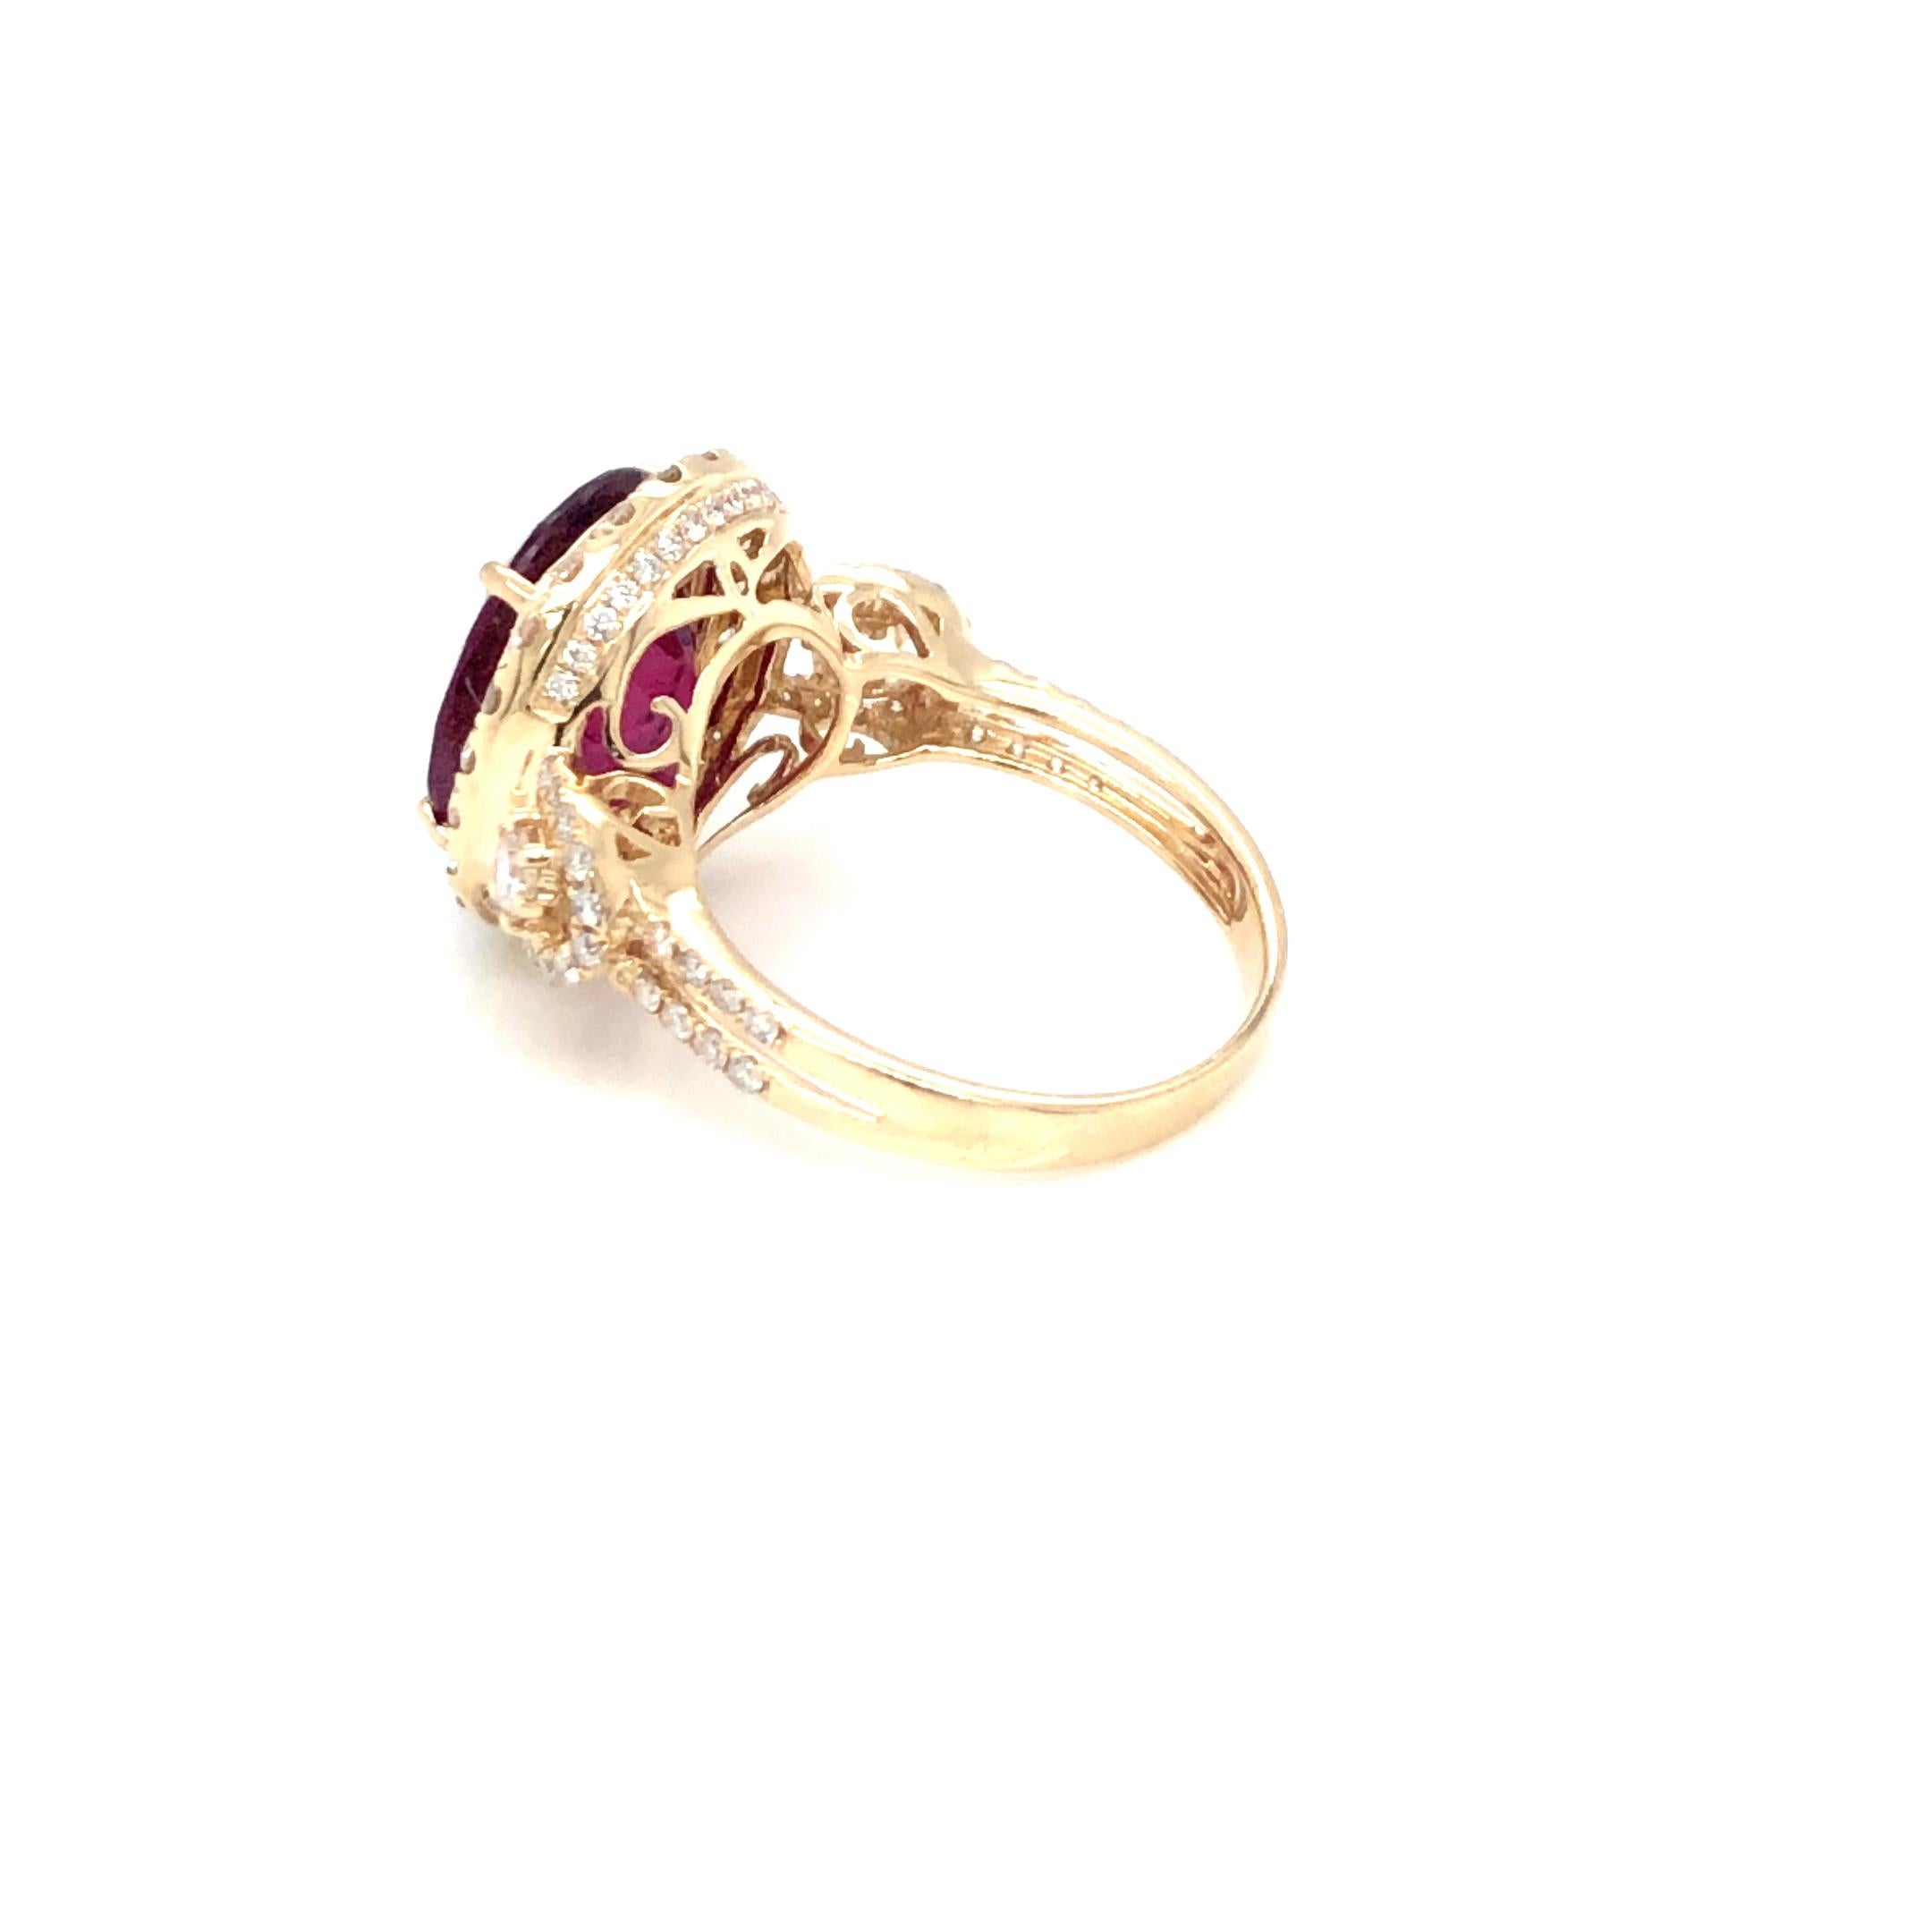 Round Cut Pink Tourmaline And Diamond Ring 14k Yellow Gold Ring For Sale